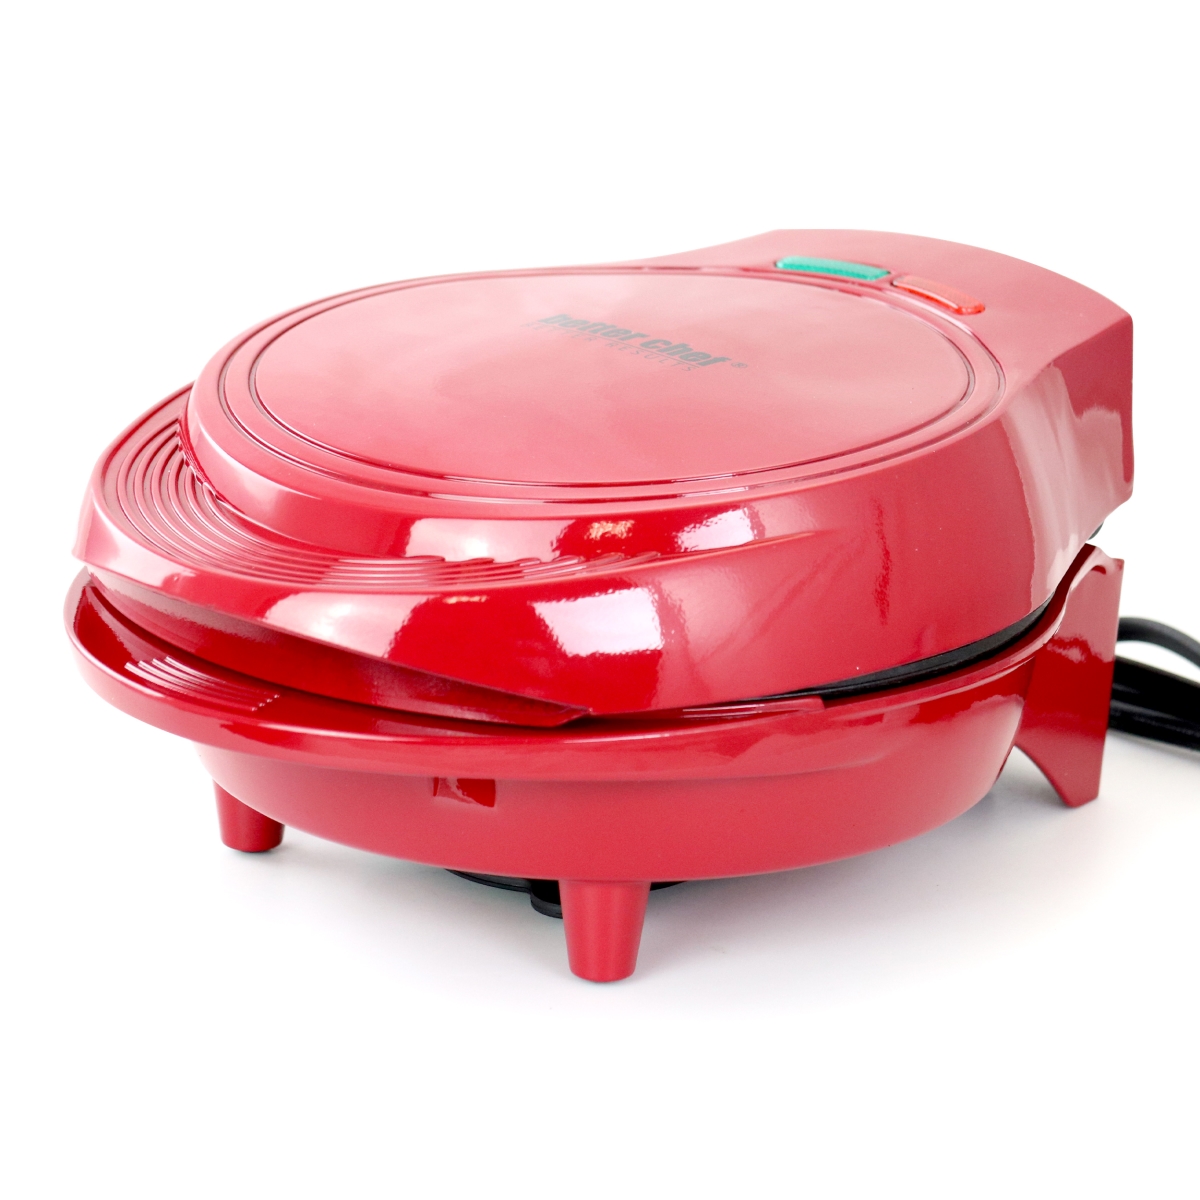 Picture of Better Chef IM-477R Electric Double Omelet Maker, Red